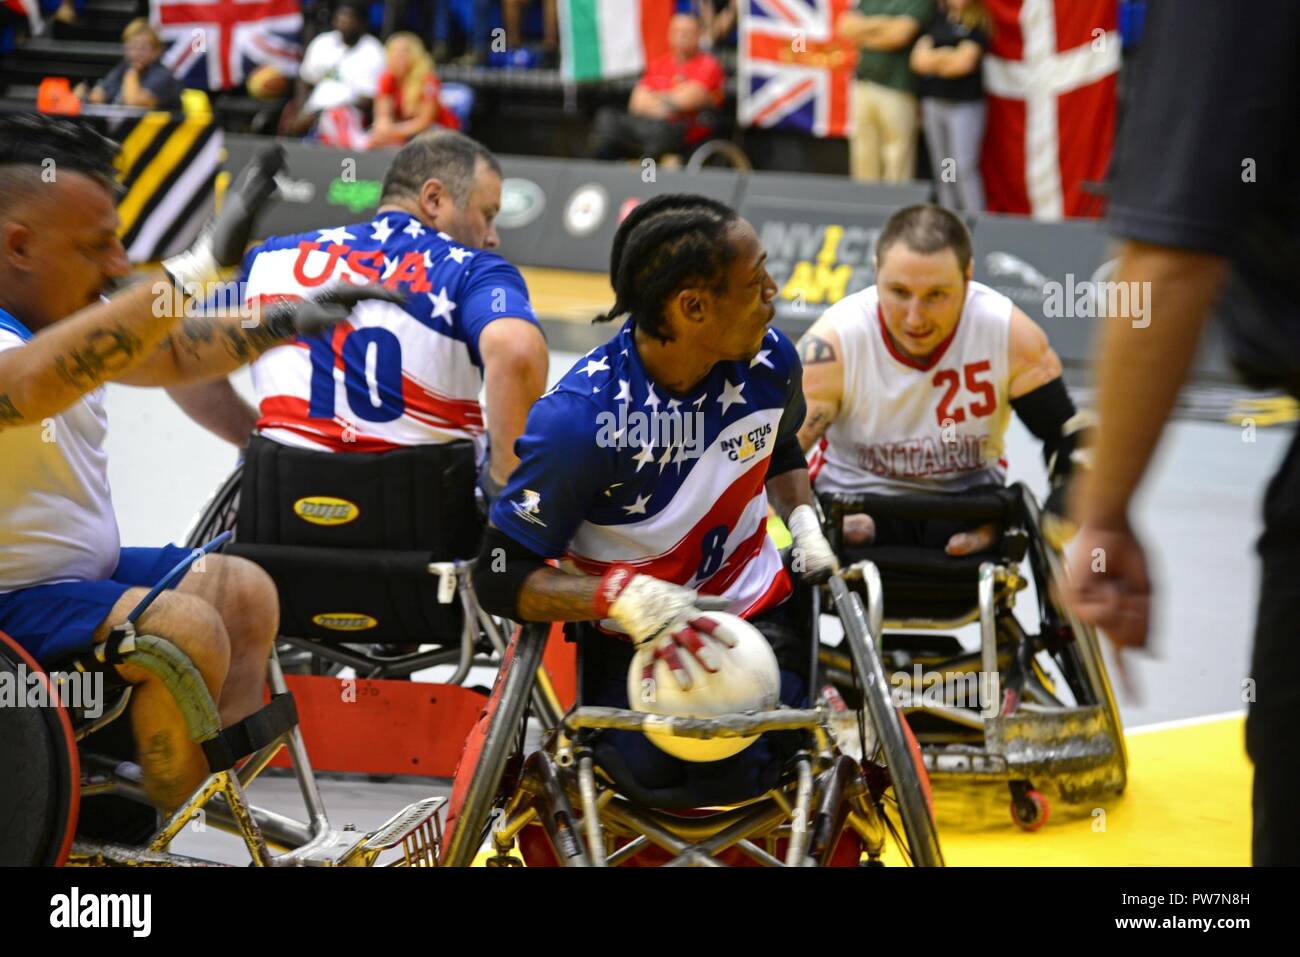 U.S. Marine Corps veteran Anthony McDaniel, a former sergeant and member of Team U.S., prepares for offensive maneuvering during a wheelchair rugby match at the 2017 Invictus Games in the Mattamy Sports Centre in Toronto, Canada, Sept. 27, 2017. The Invictus Games were established by Prince Harry of Wales in 2014, and have brought together wounded and injured veterans from 17 nations to compete across 12 adaptive sporting events. Stock Photo